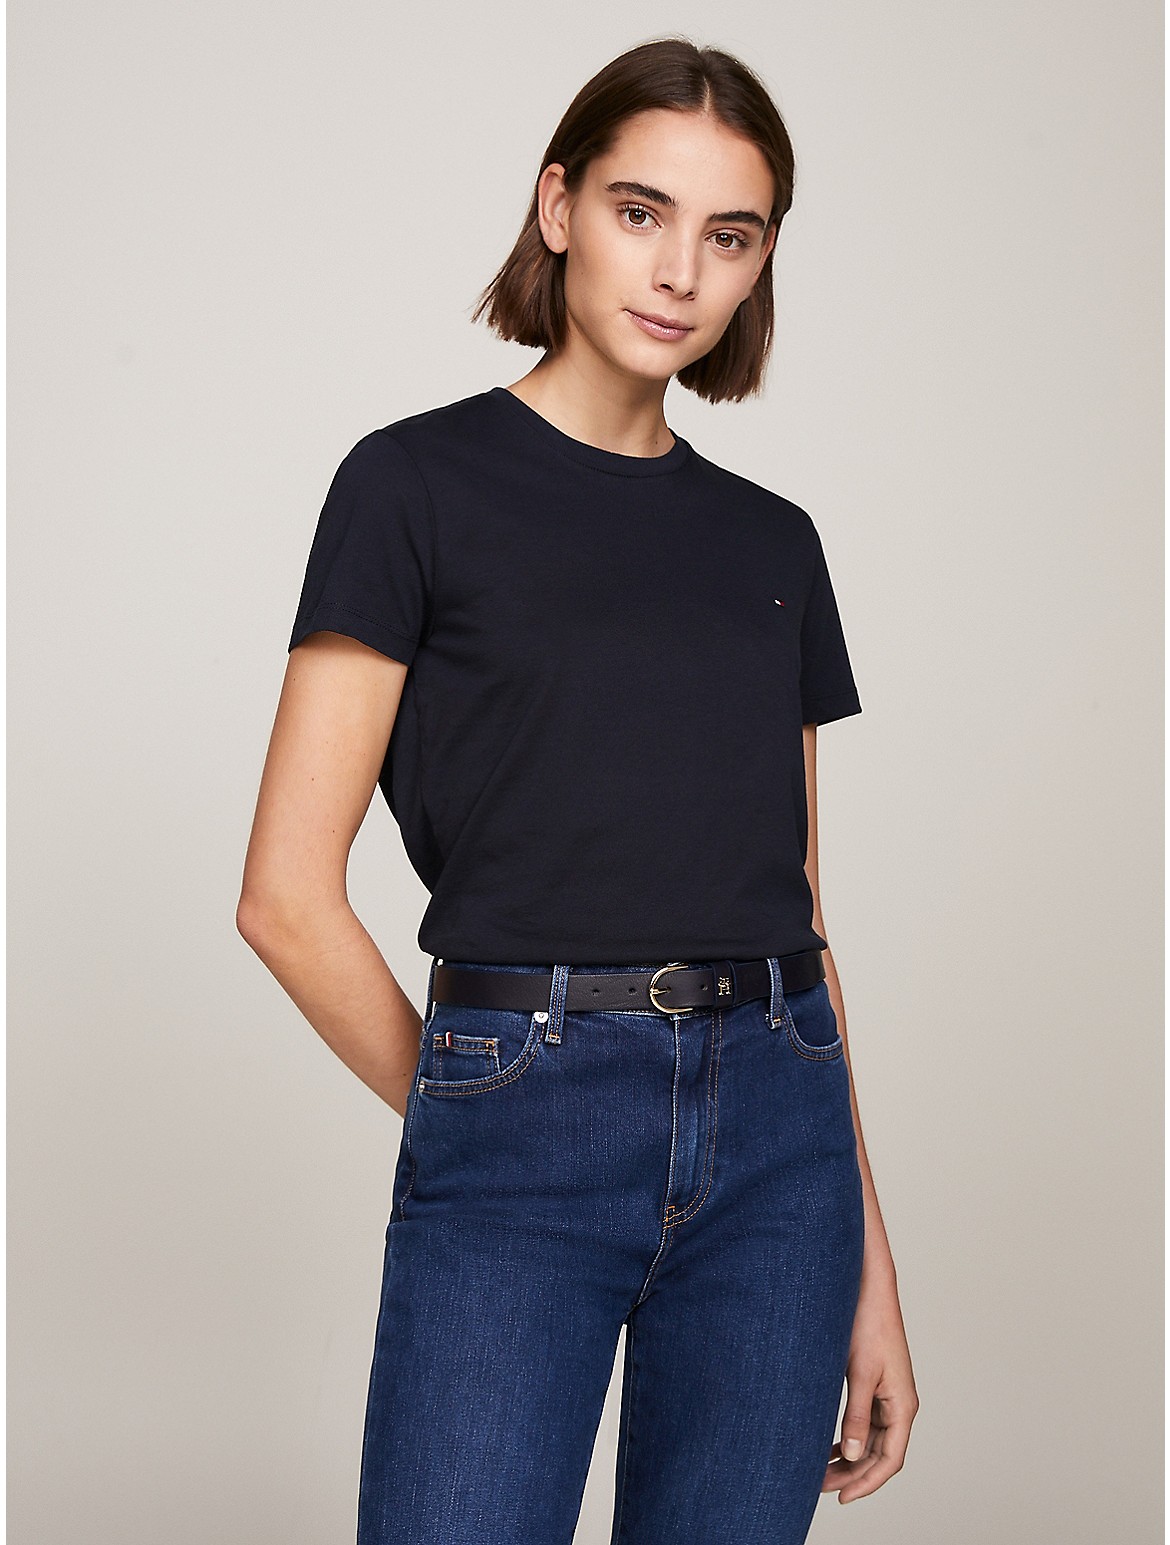 Tommy Hilfiger Women's Essential Solid T-Shirt